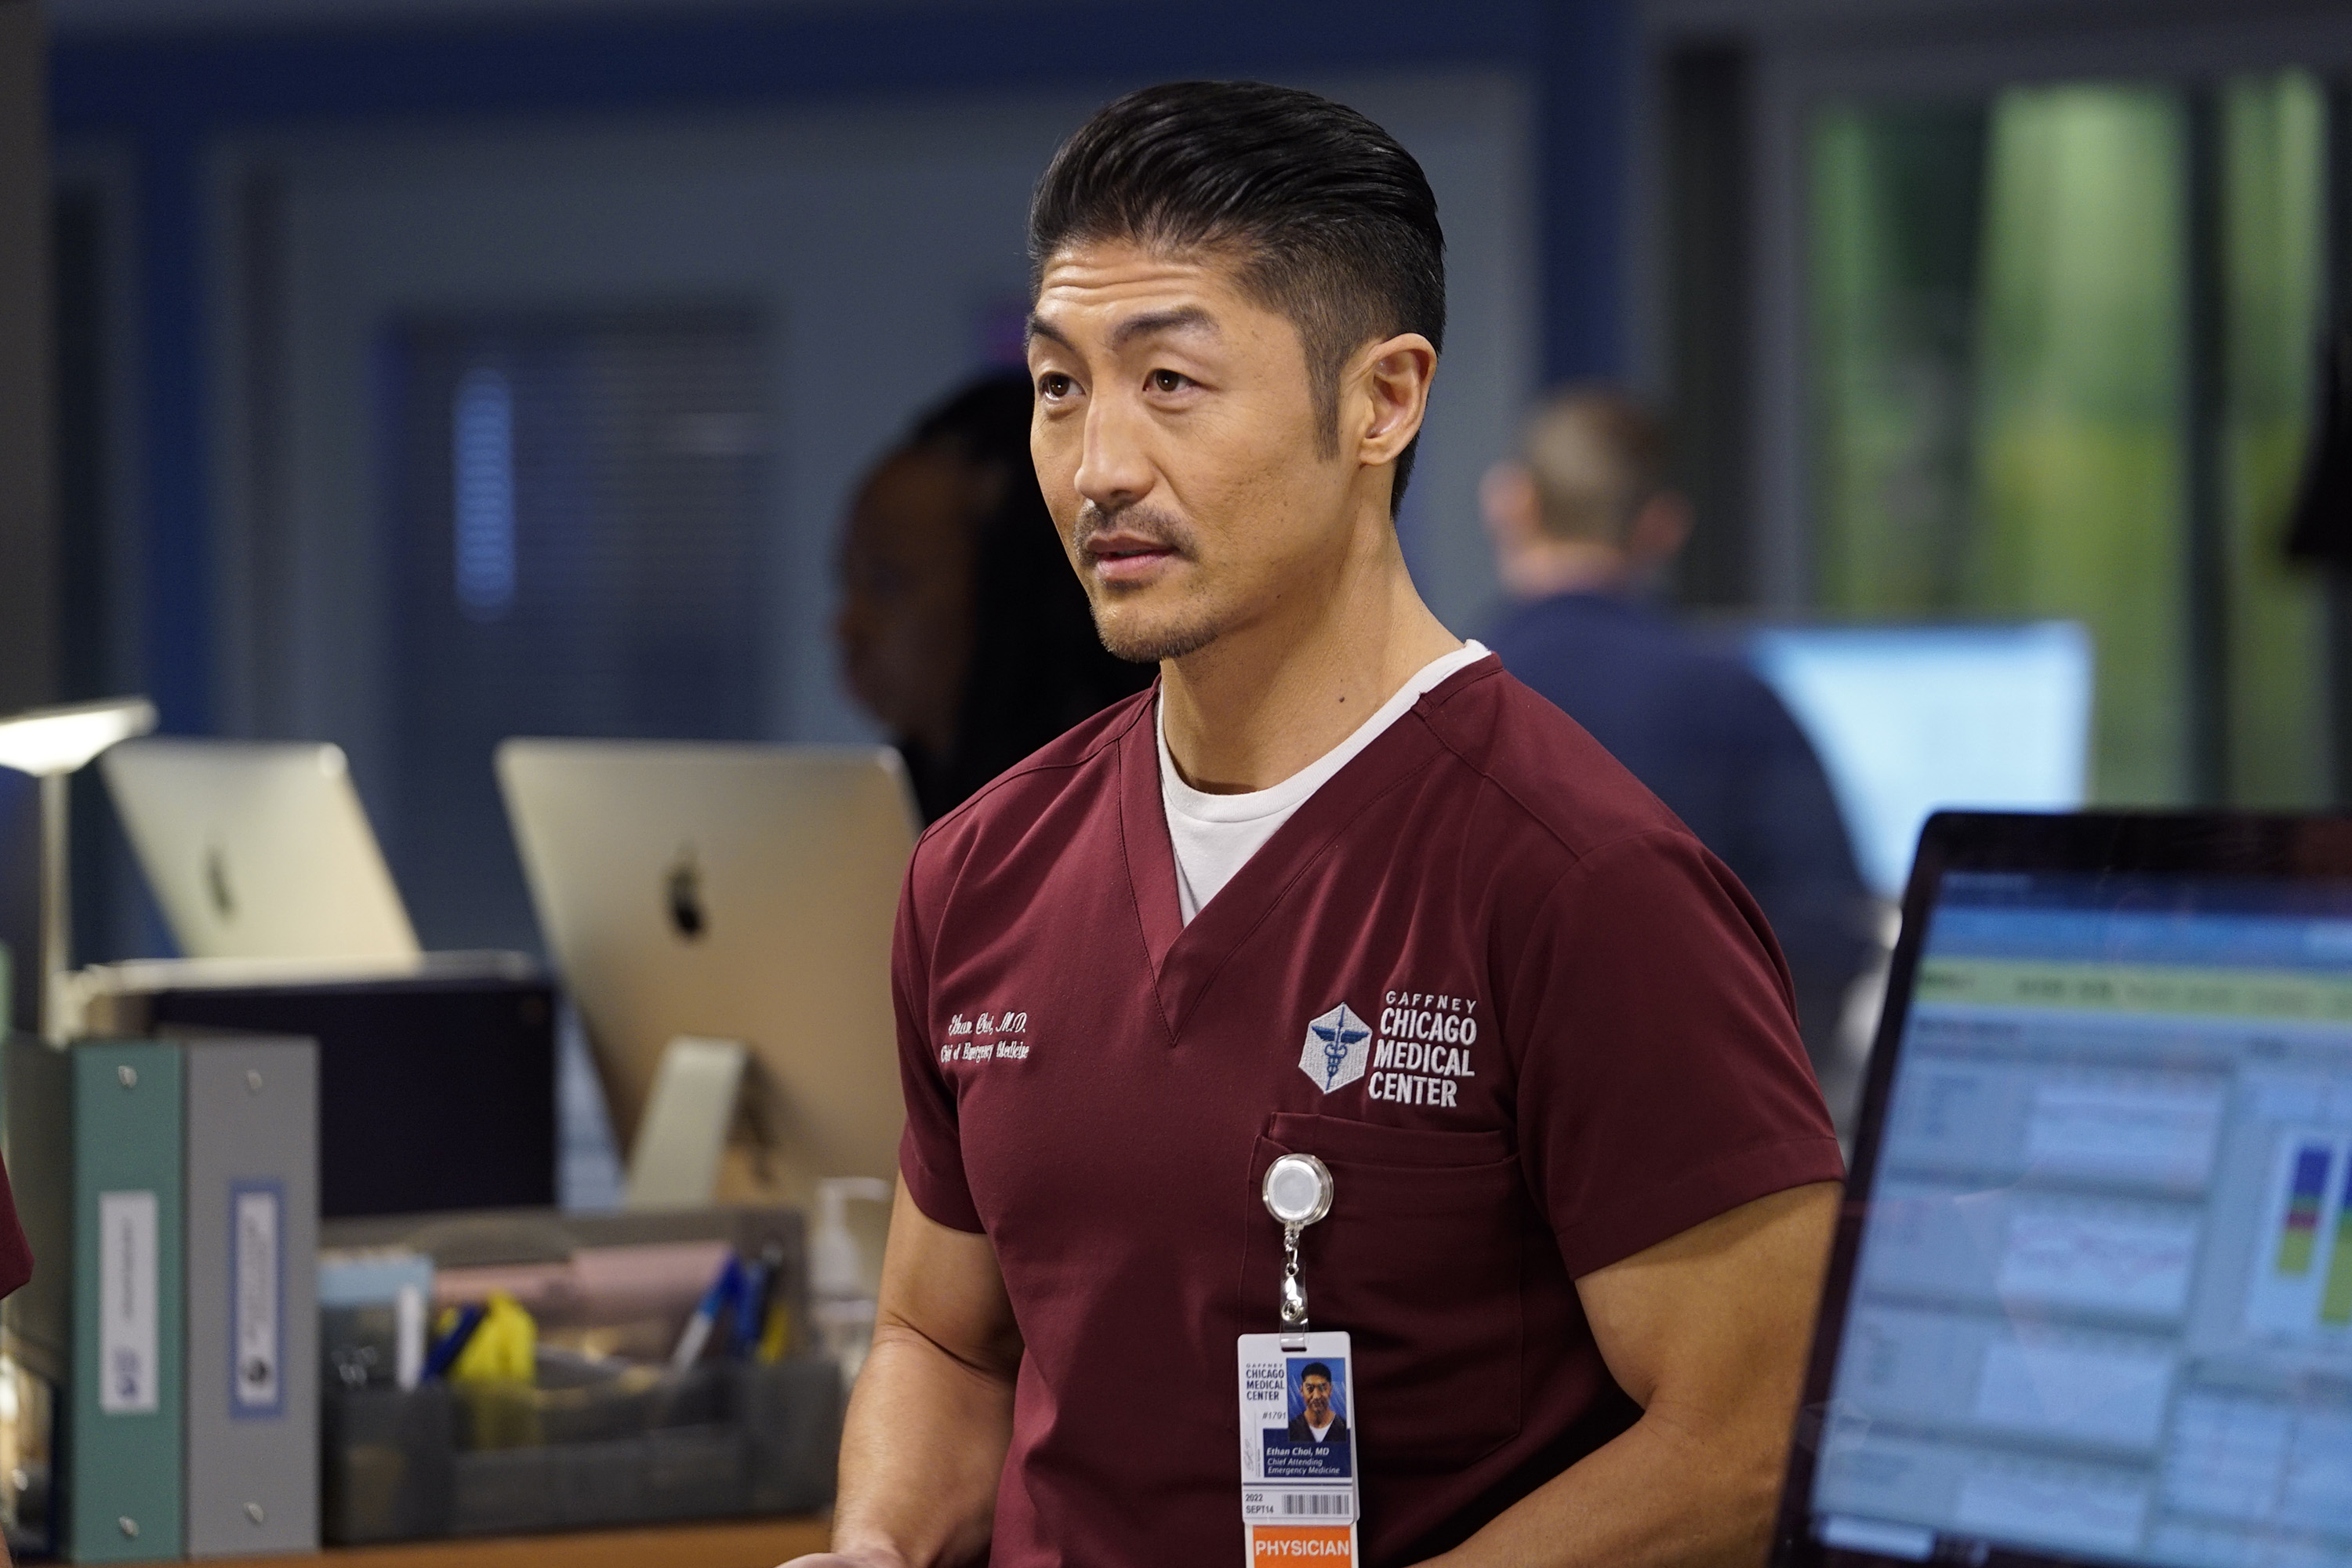 Brian Tee plays Ethan Choi on Chicago Med